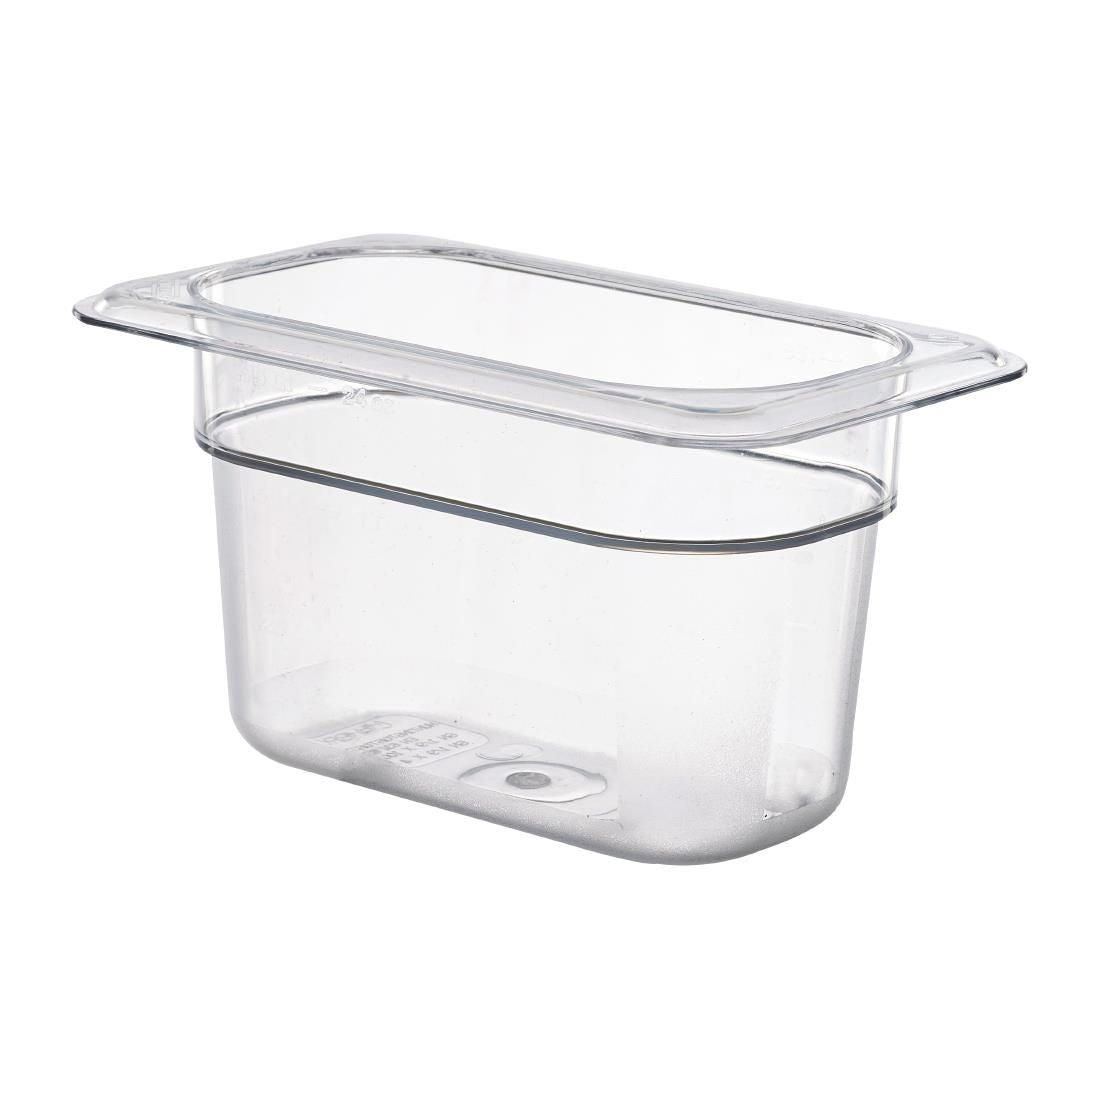 DM758 Cambro Polycarbonate 1/9 Gastronorm Pan 100mm JD Catering Equipment Solutions Ltd